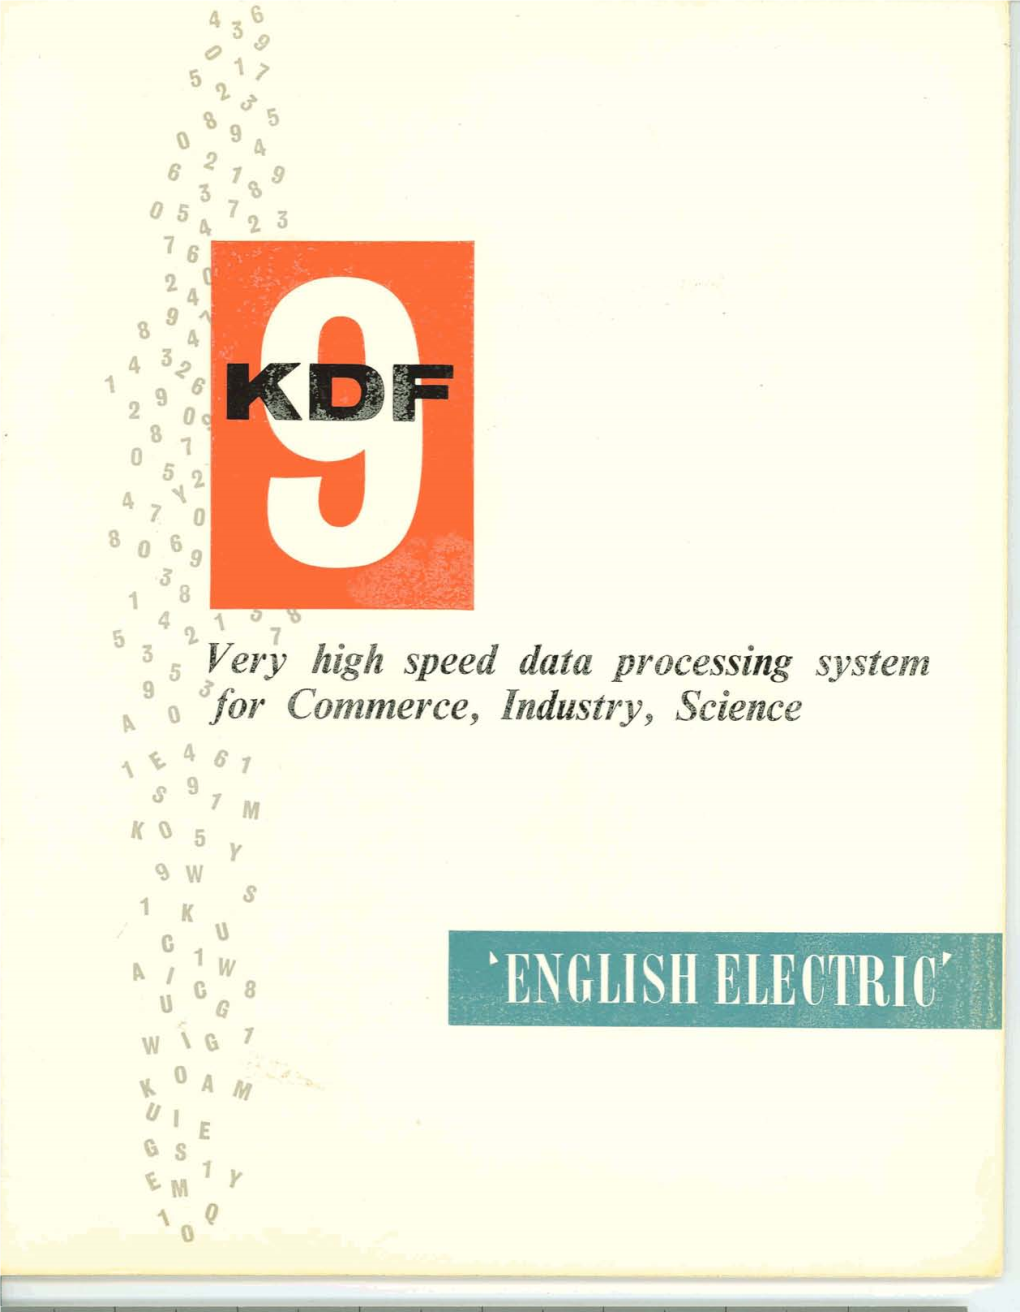 English Electric KDF9 Computers